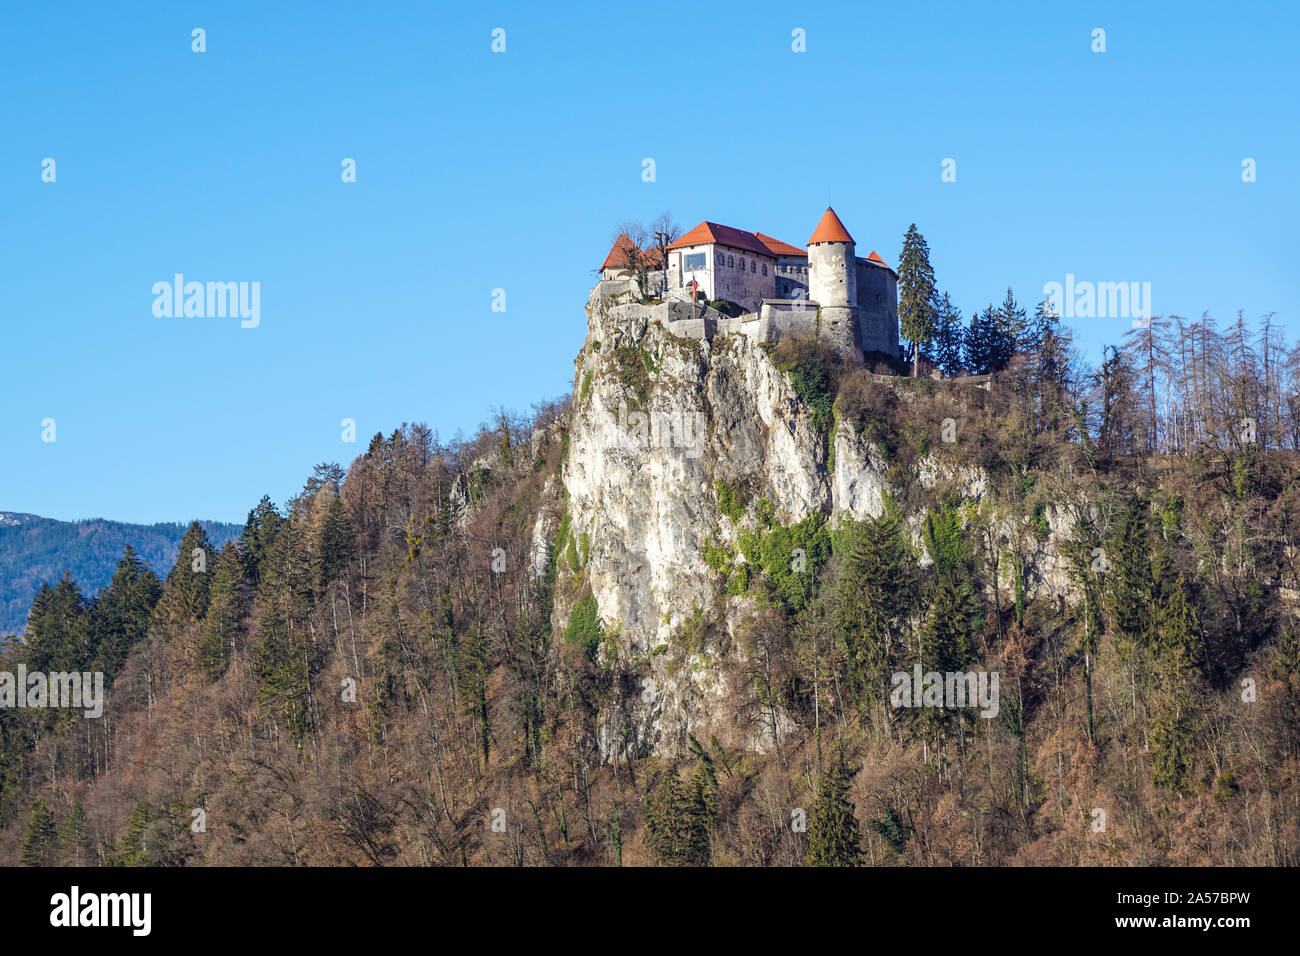 Bled Castle built on top of a cliff overlooking lake Bled, located in Bled, Slovenia. Stock Photo